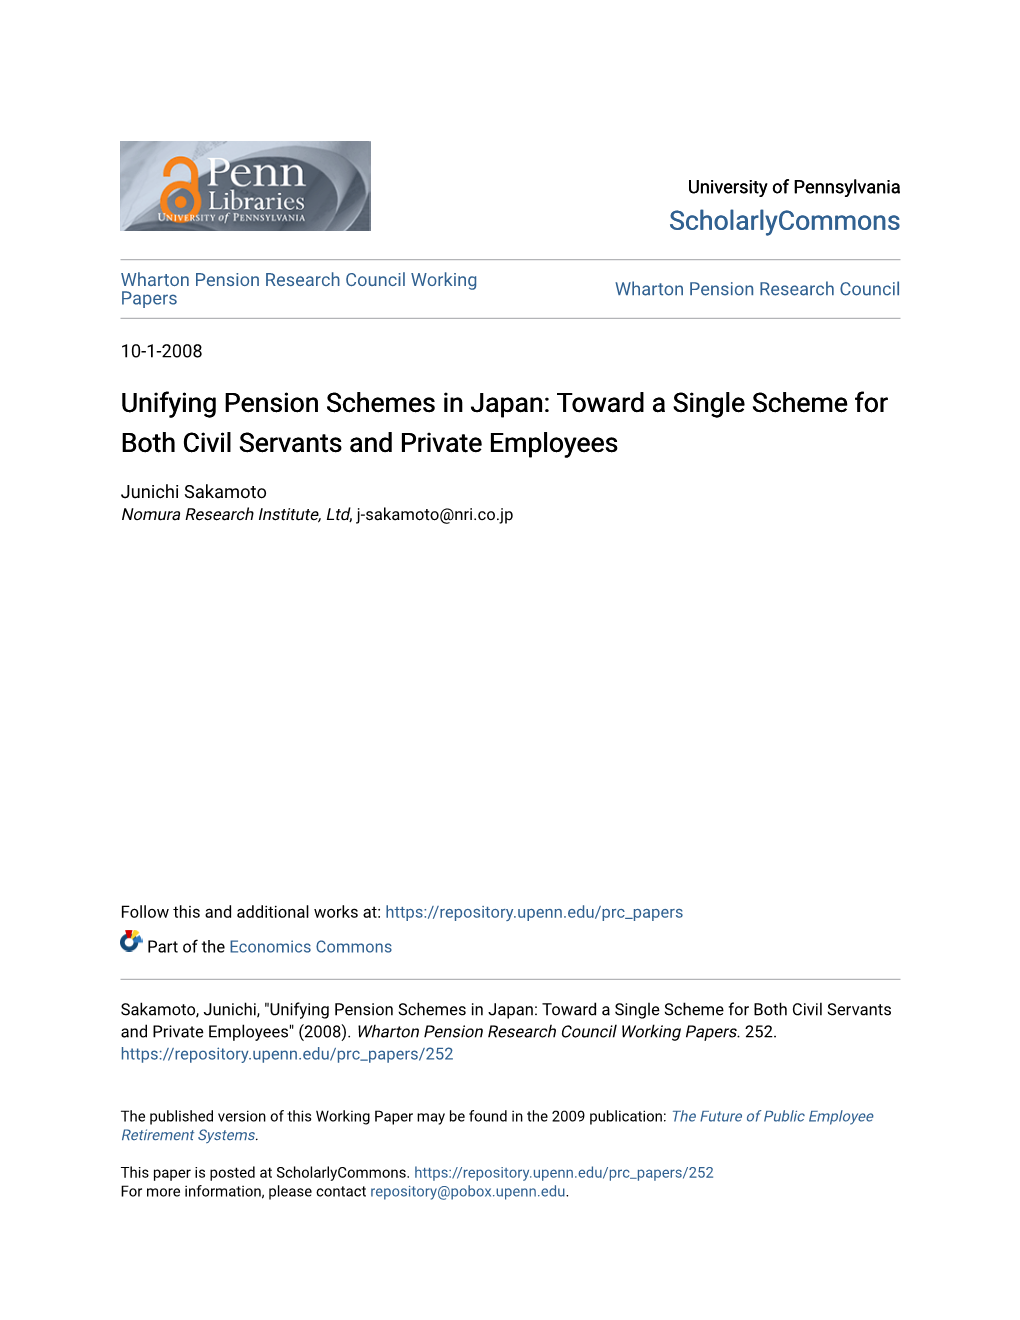 Unifying Pension Schemes in Japan: Toward a Single Scheme for Both Civil Servants and Private Employees